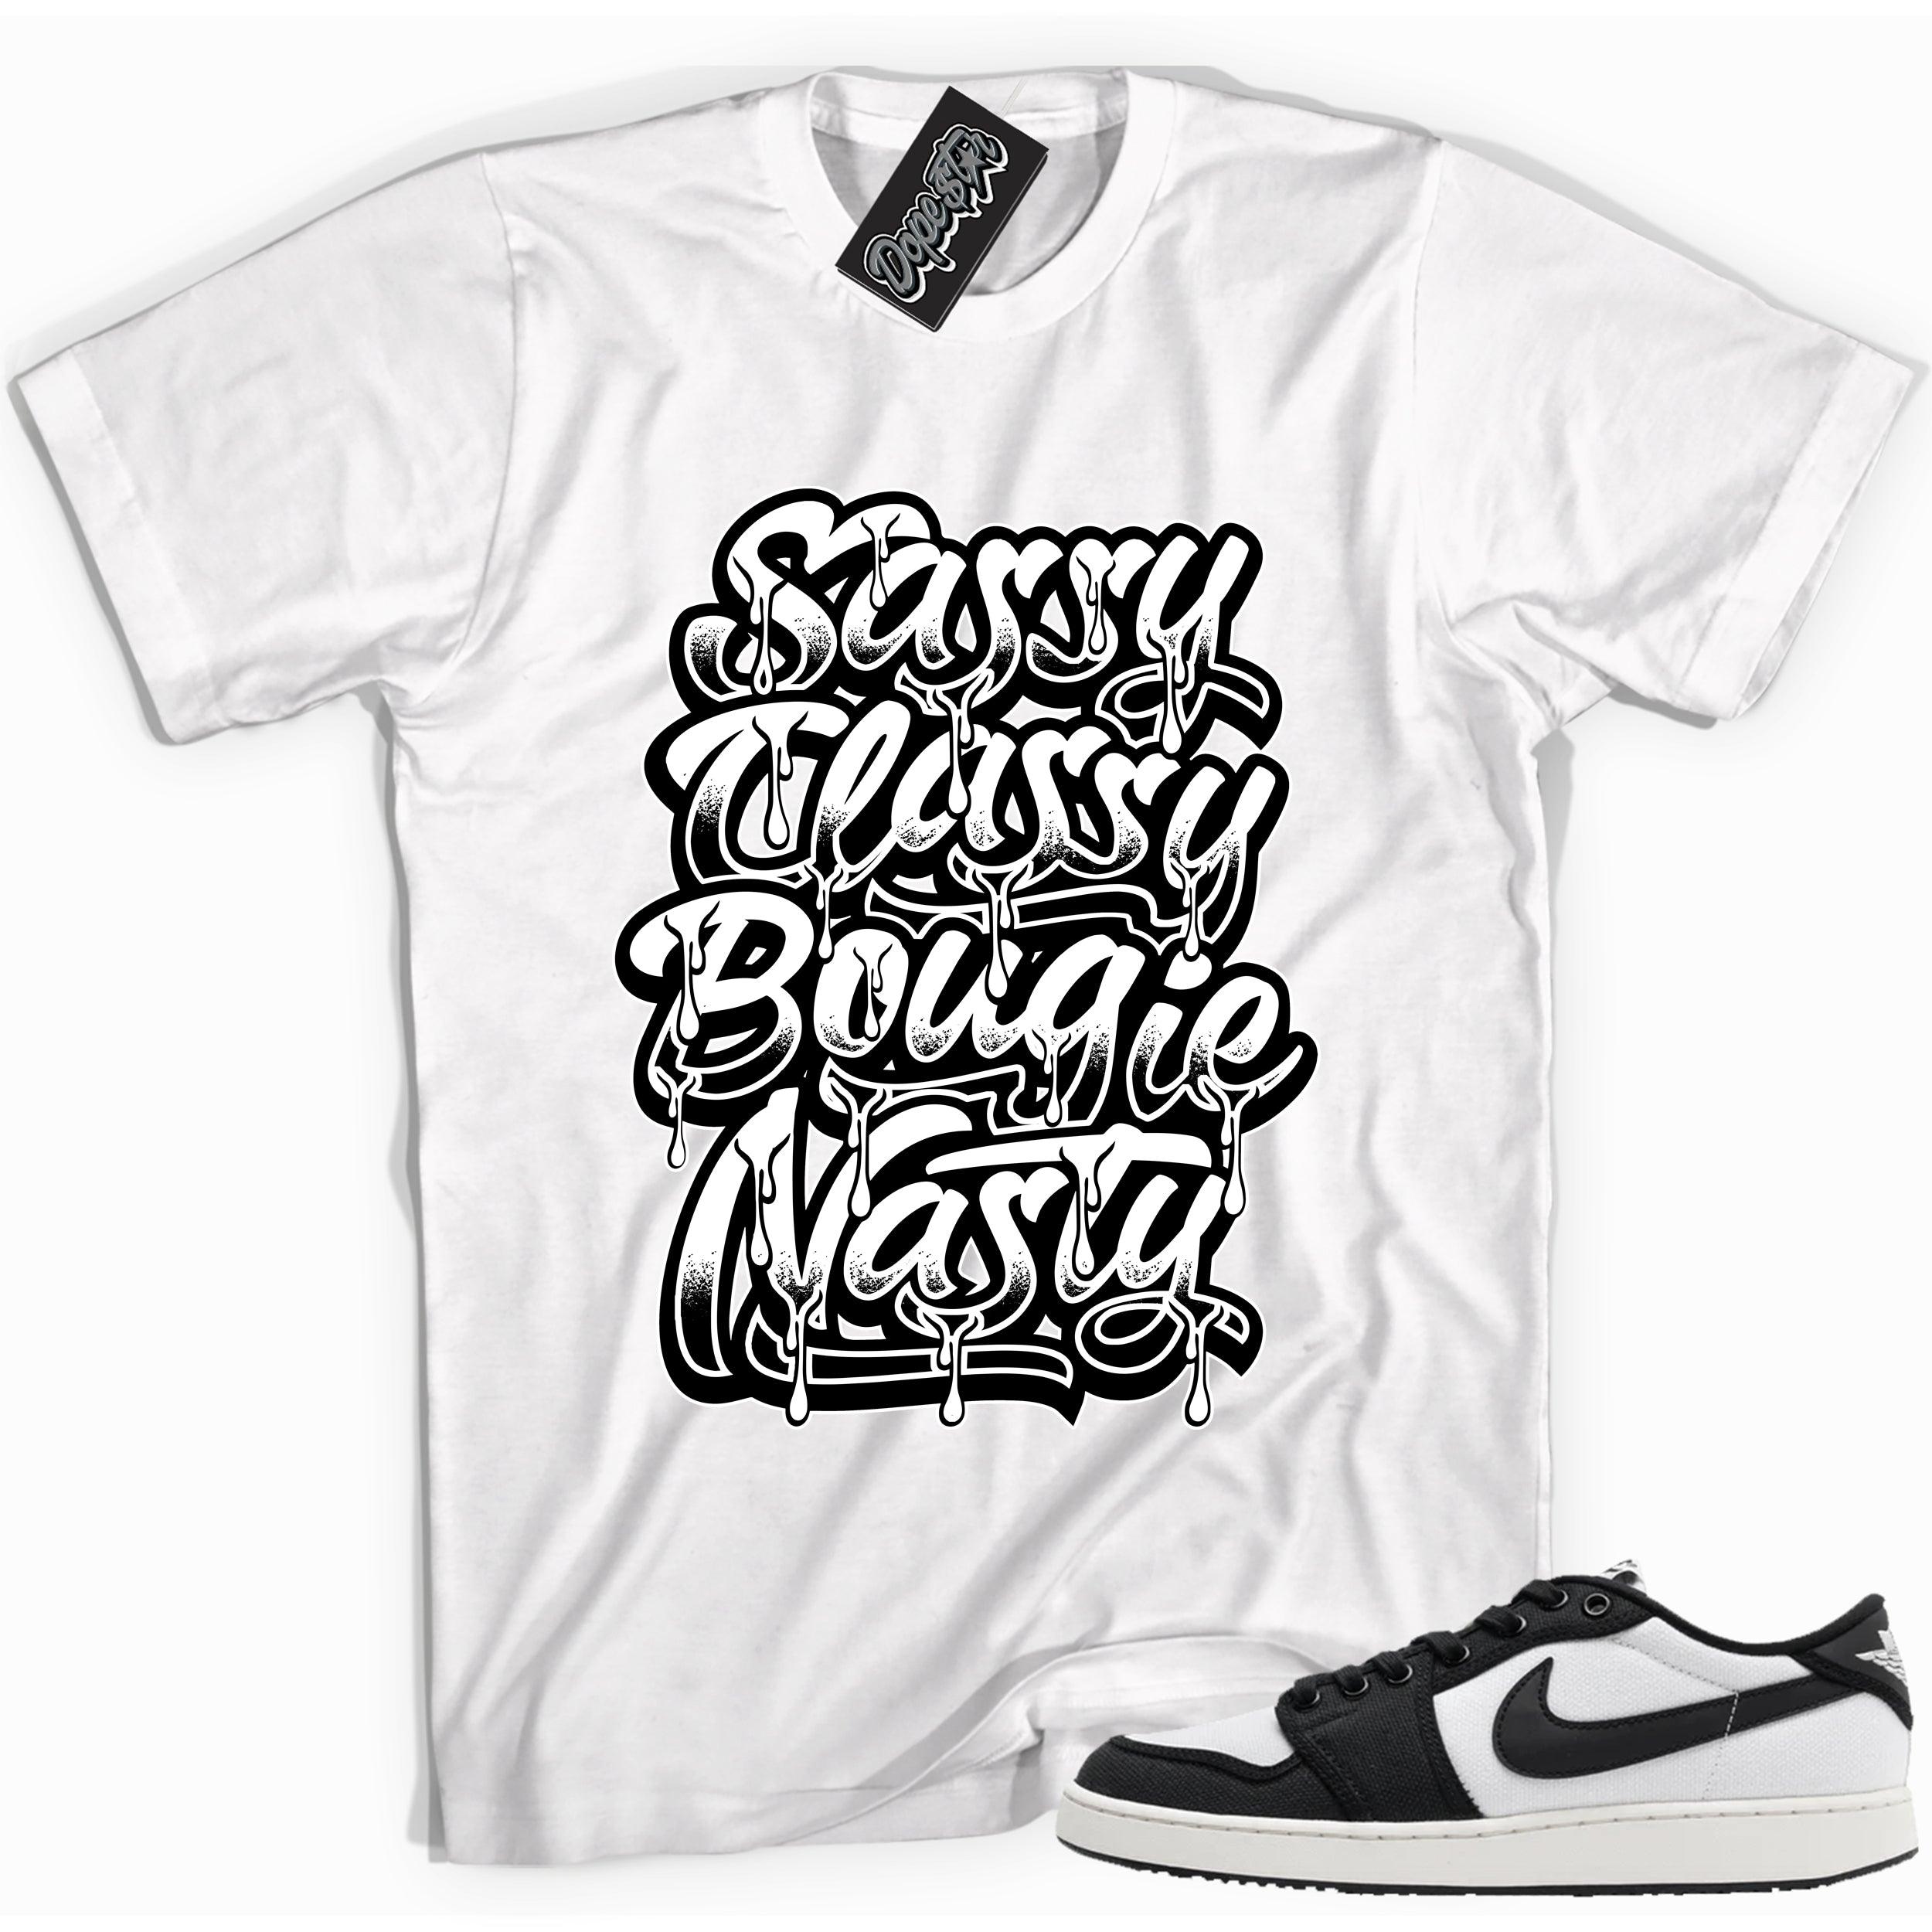 Cool white graphic tee with 'sassy classy' print, that perfectly matches Air Jordan 1 Retro Ajko Low Black & White sneakers.